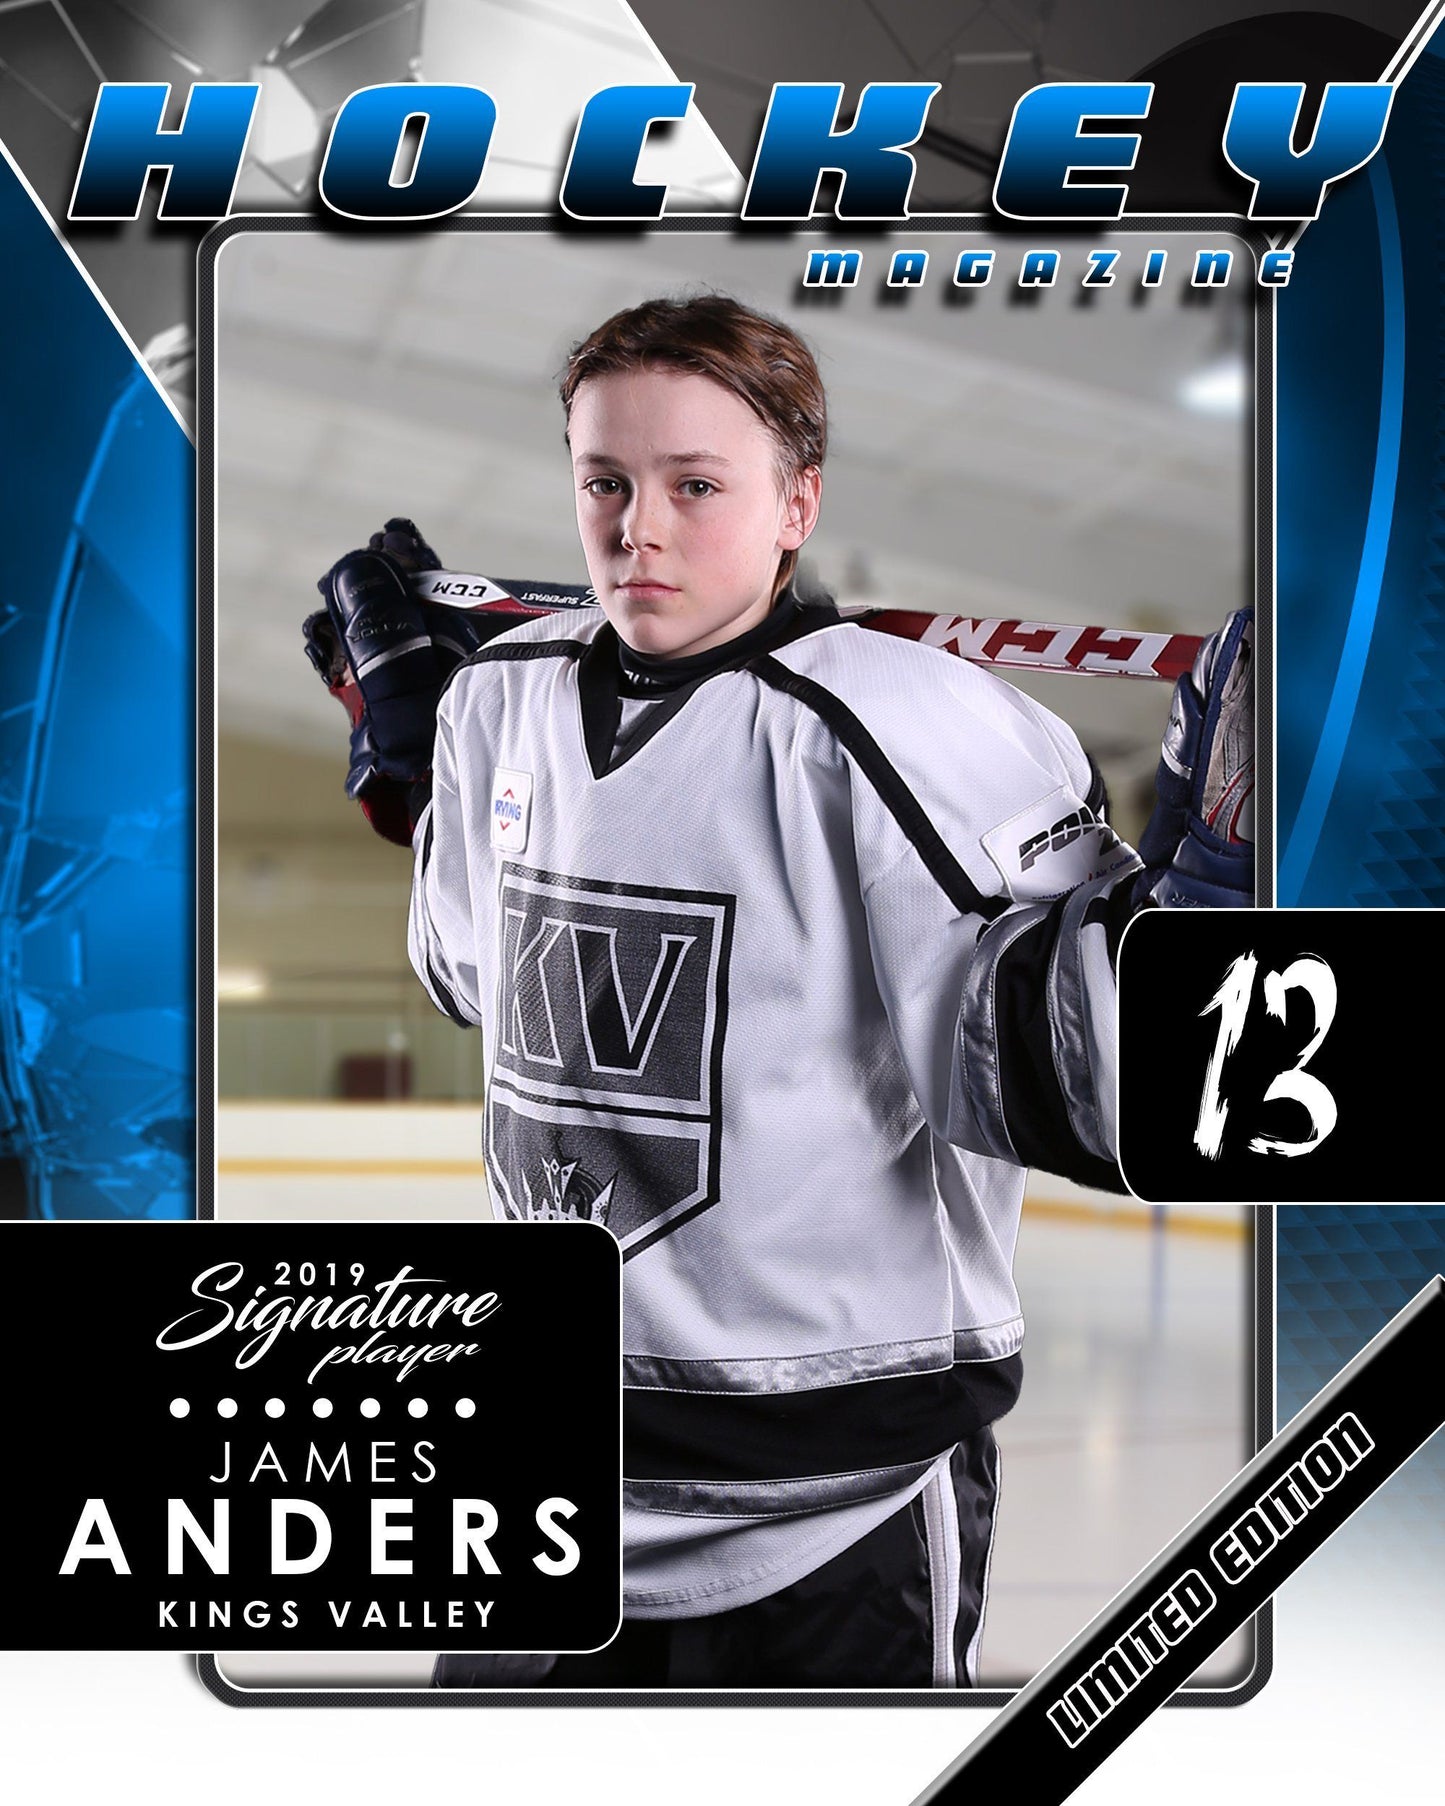 Signature Player - Hockey - V2 - Drop-In Magazine Cover Template-Photoshop Template - Photo Solutions